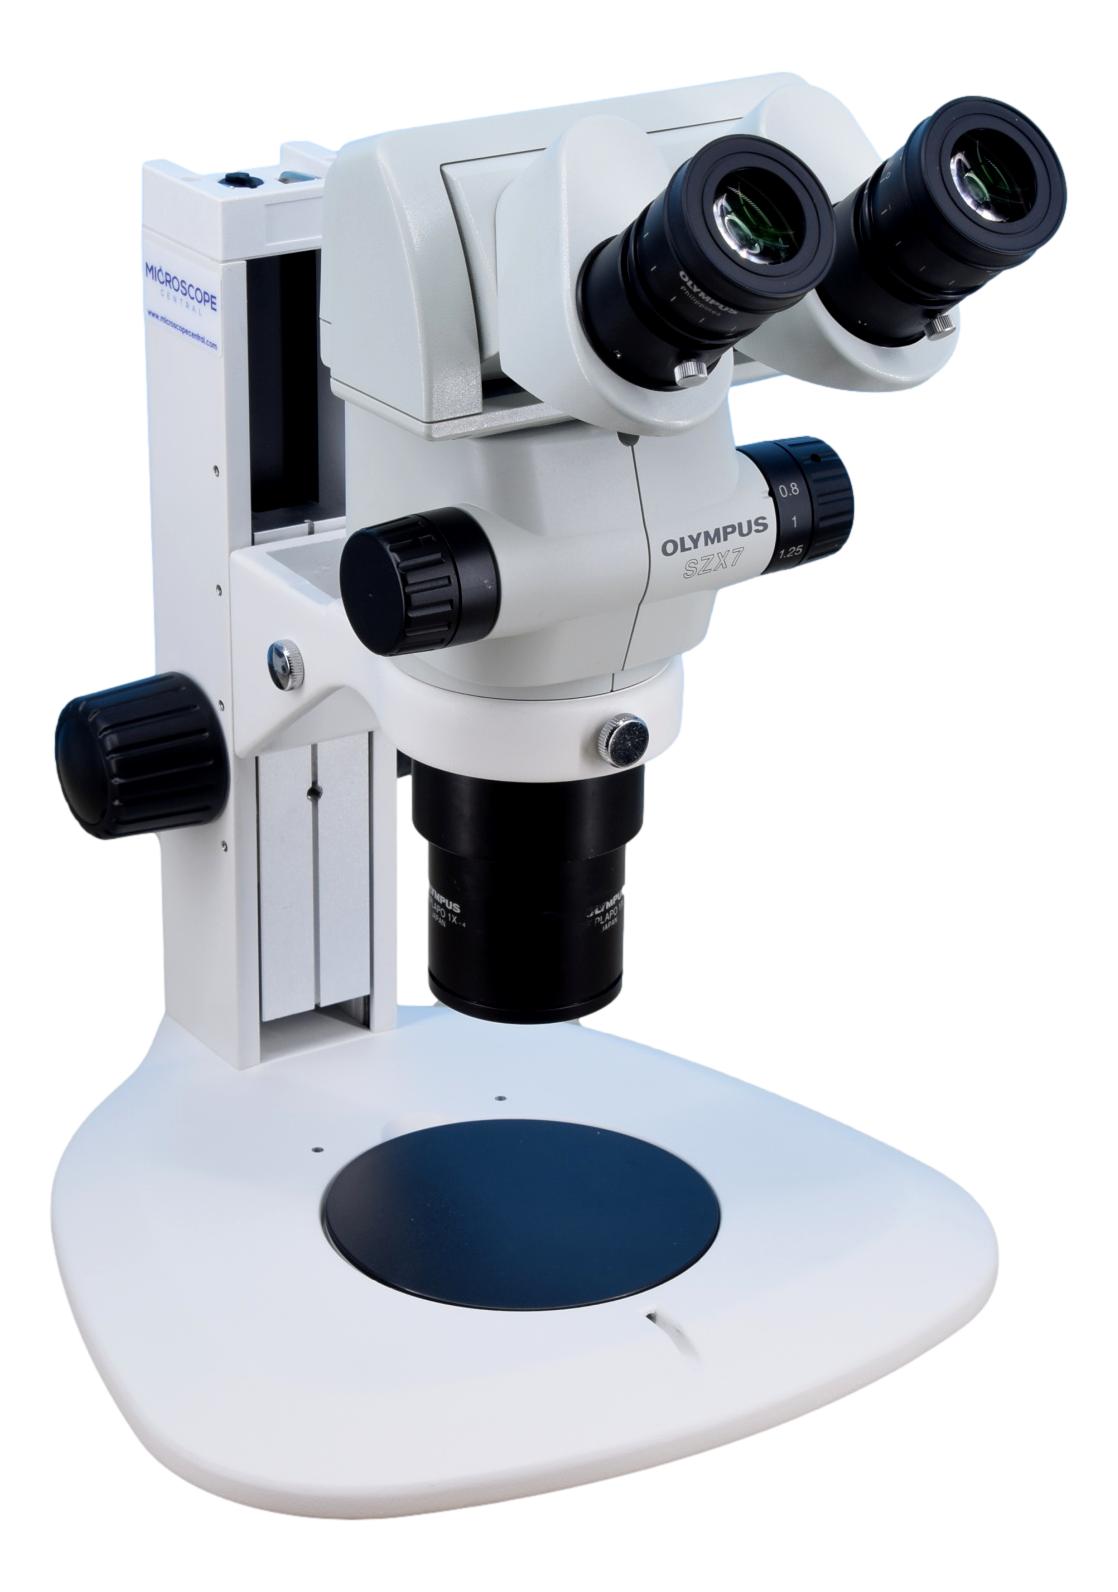 Olympus SZX7 Stereo Microscope 0.8x - 5.6x on Plain Stand